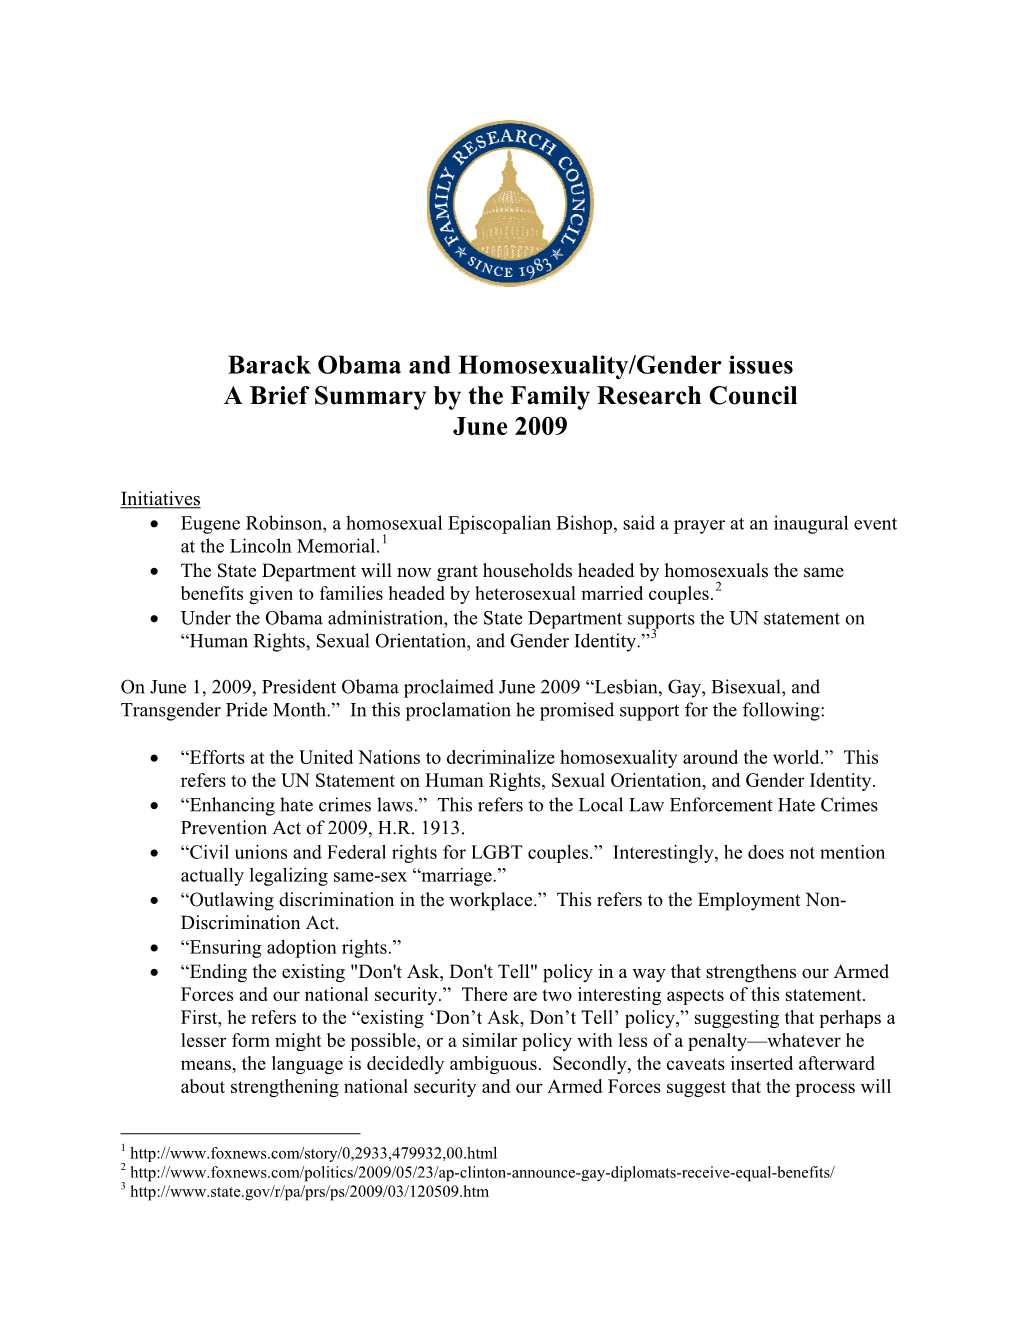 Barack Obama and Homosexuality/Gender Issues a Brief Summary by the Family Research Council June 2009